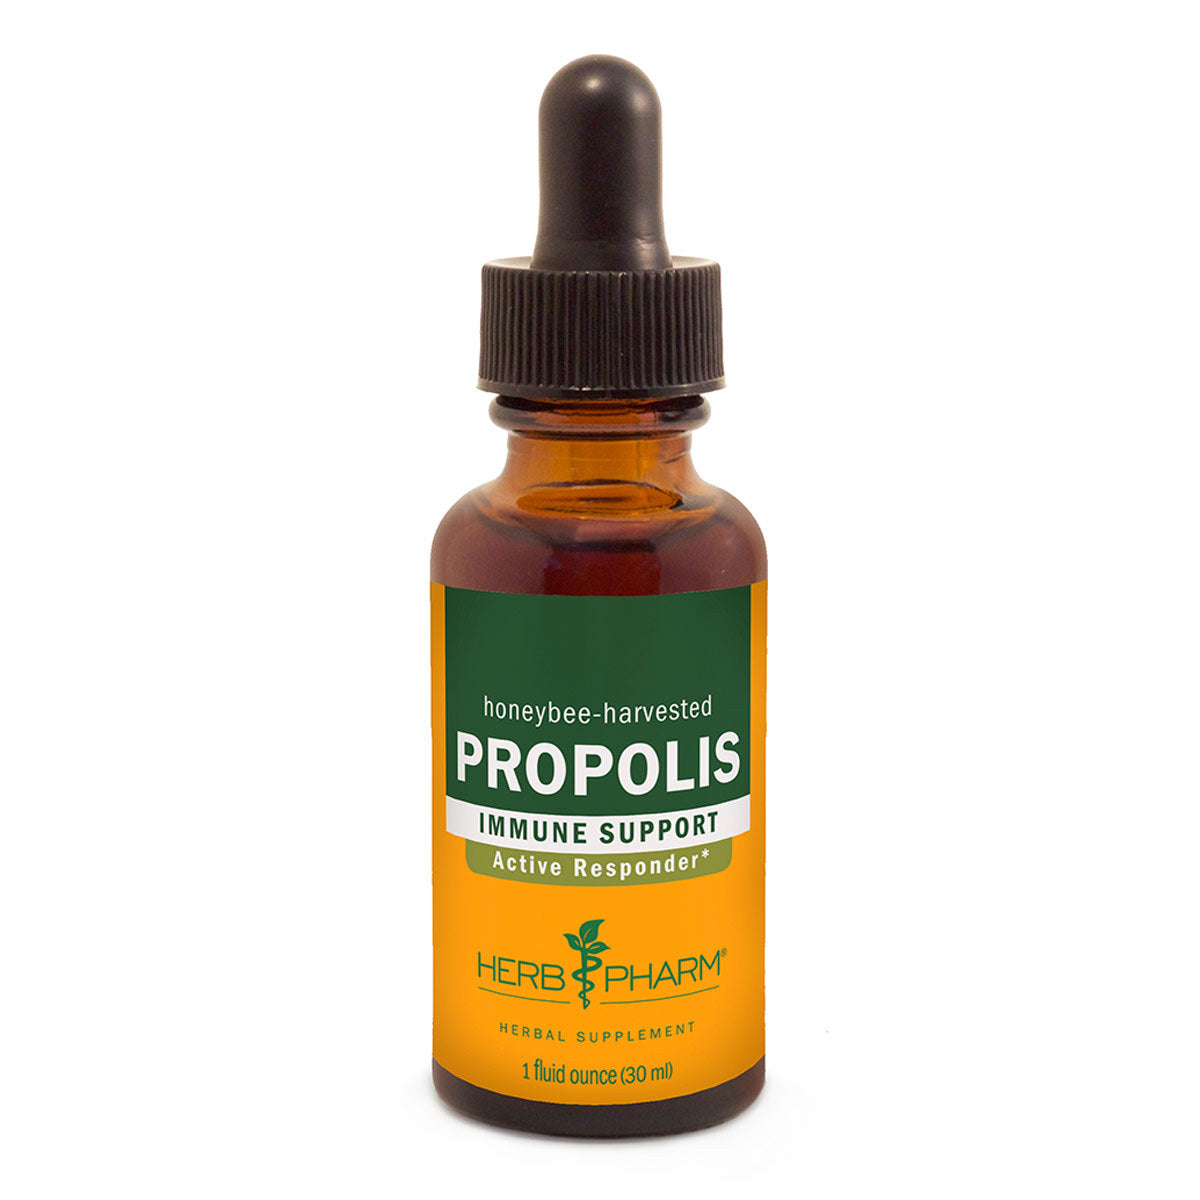 Primary image of Propolis Extract